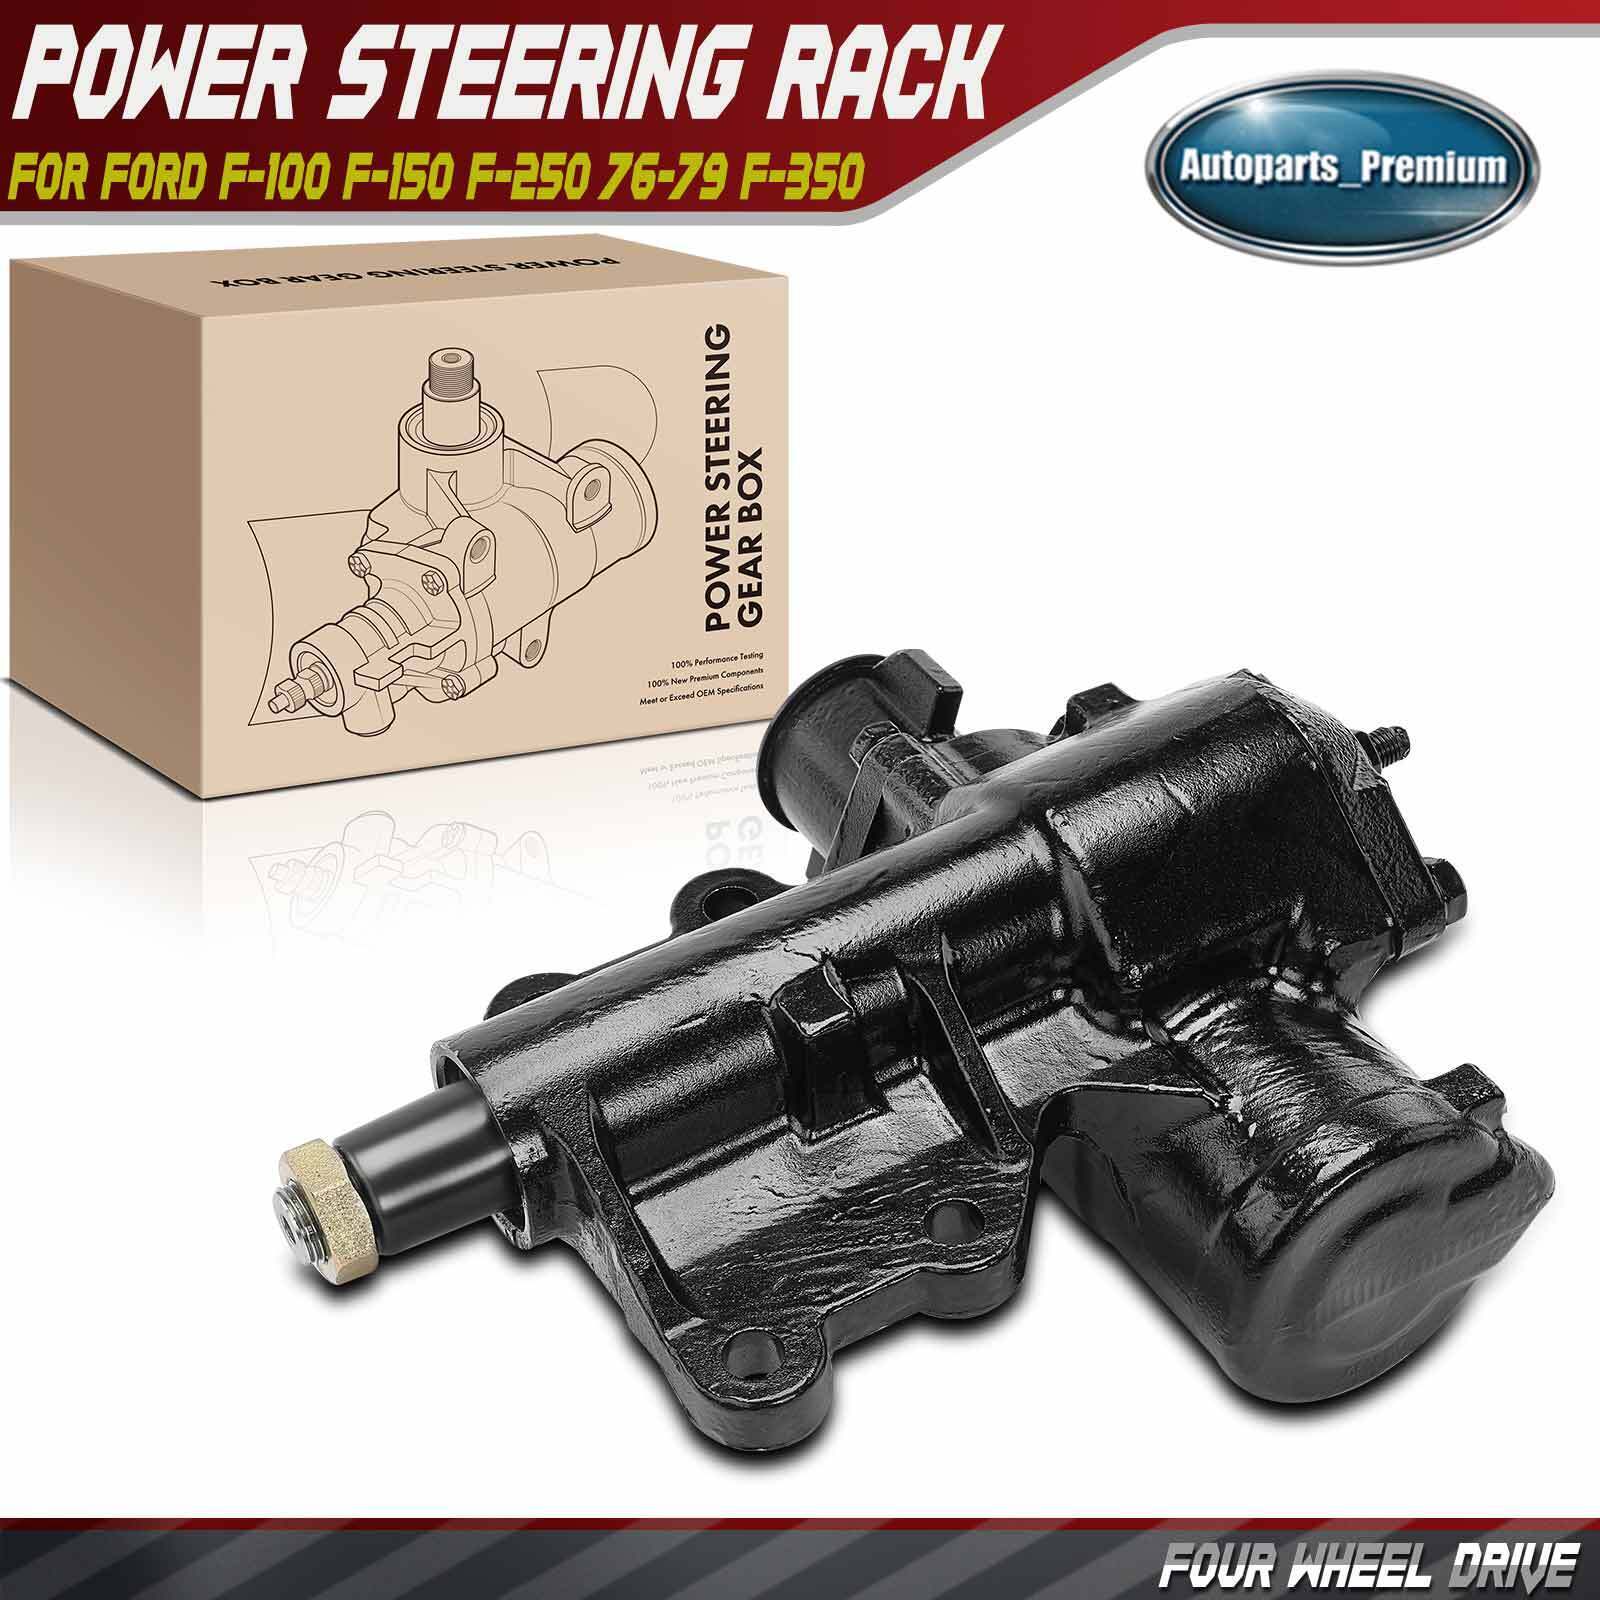 Power Steering Gear Box for Ford F-100 F-150 F-250 76-79 F-350 Four Wheel Drive